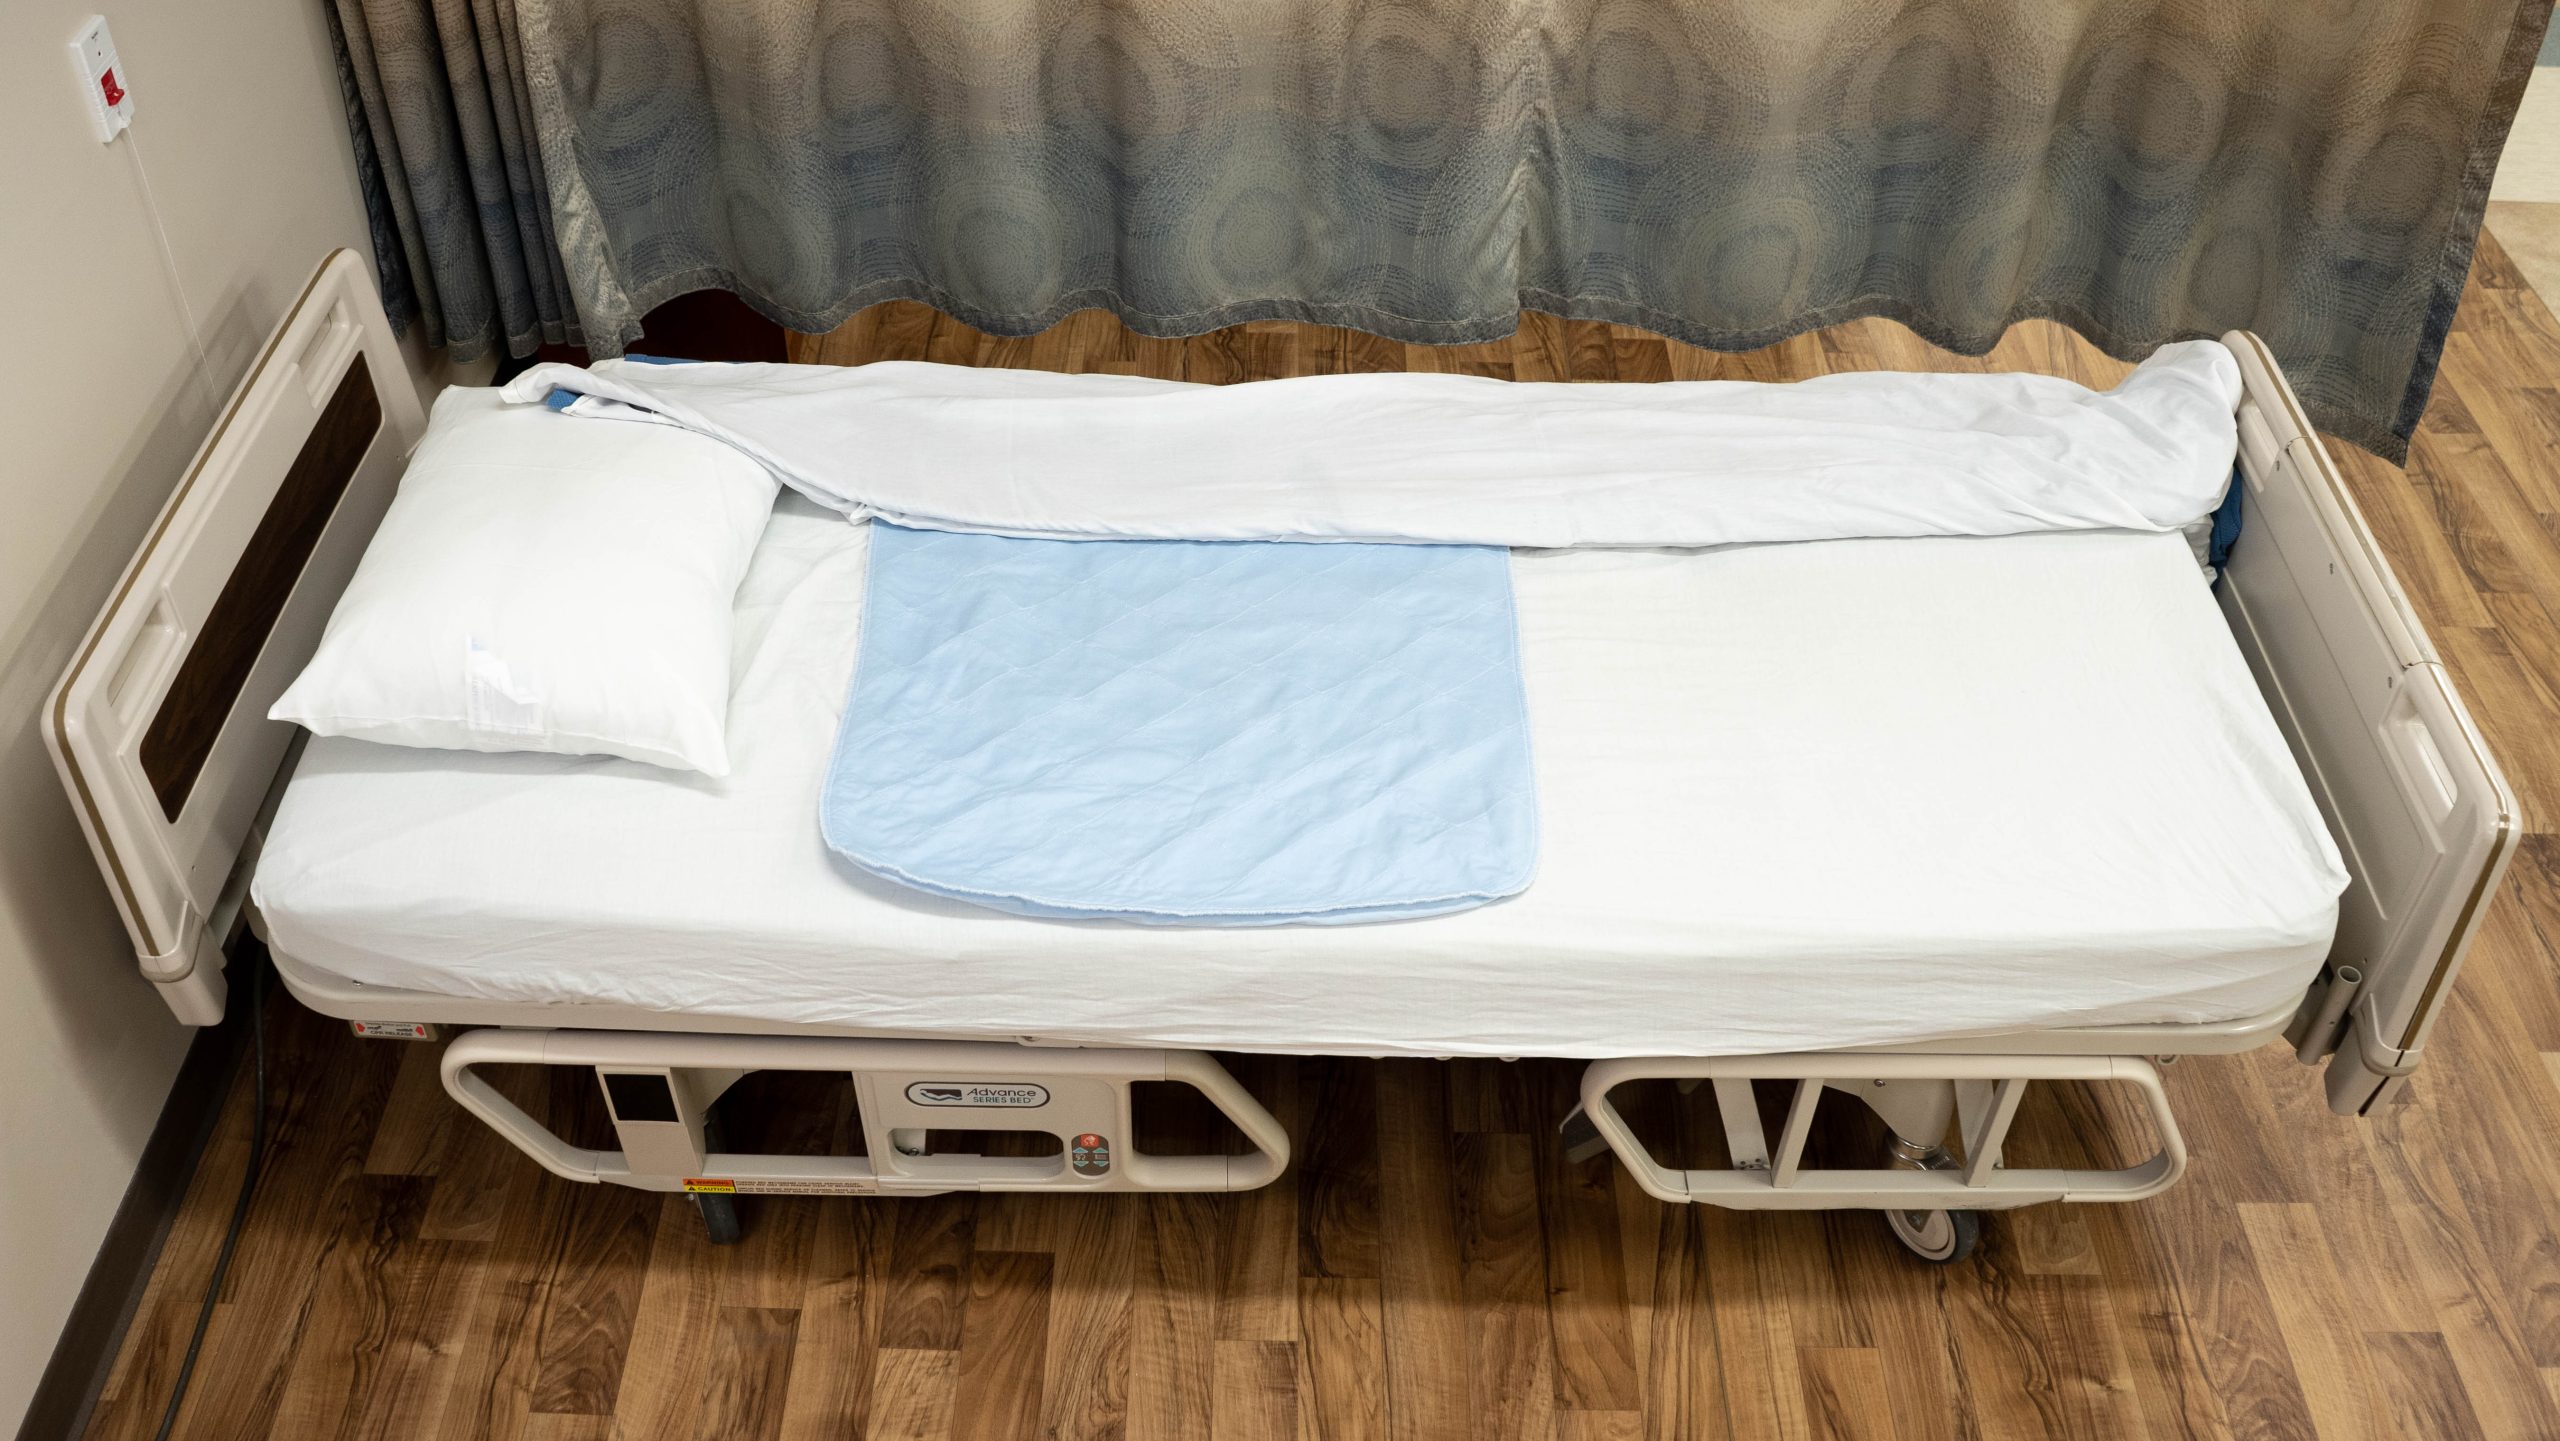 A bed made with the sheets pulled to one side for easy transferring from a stretcher.